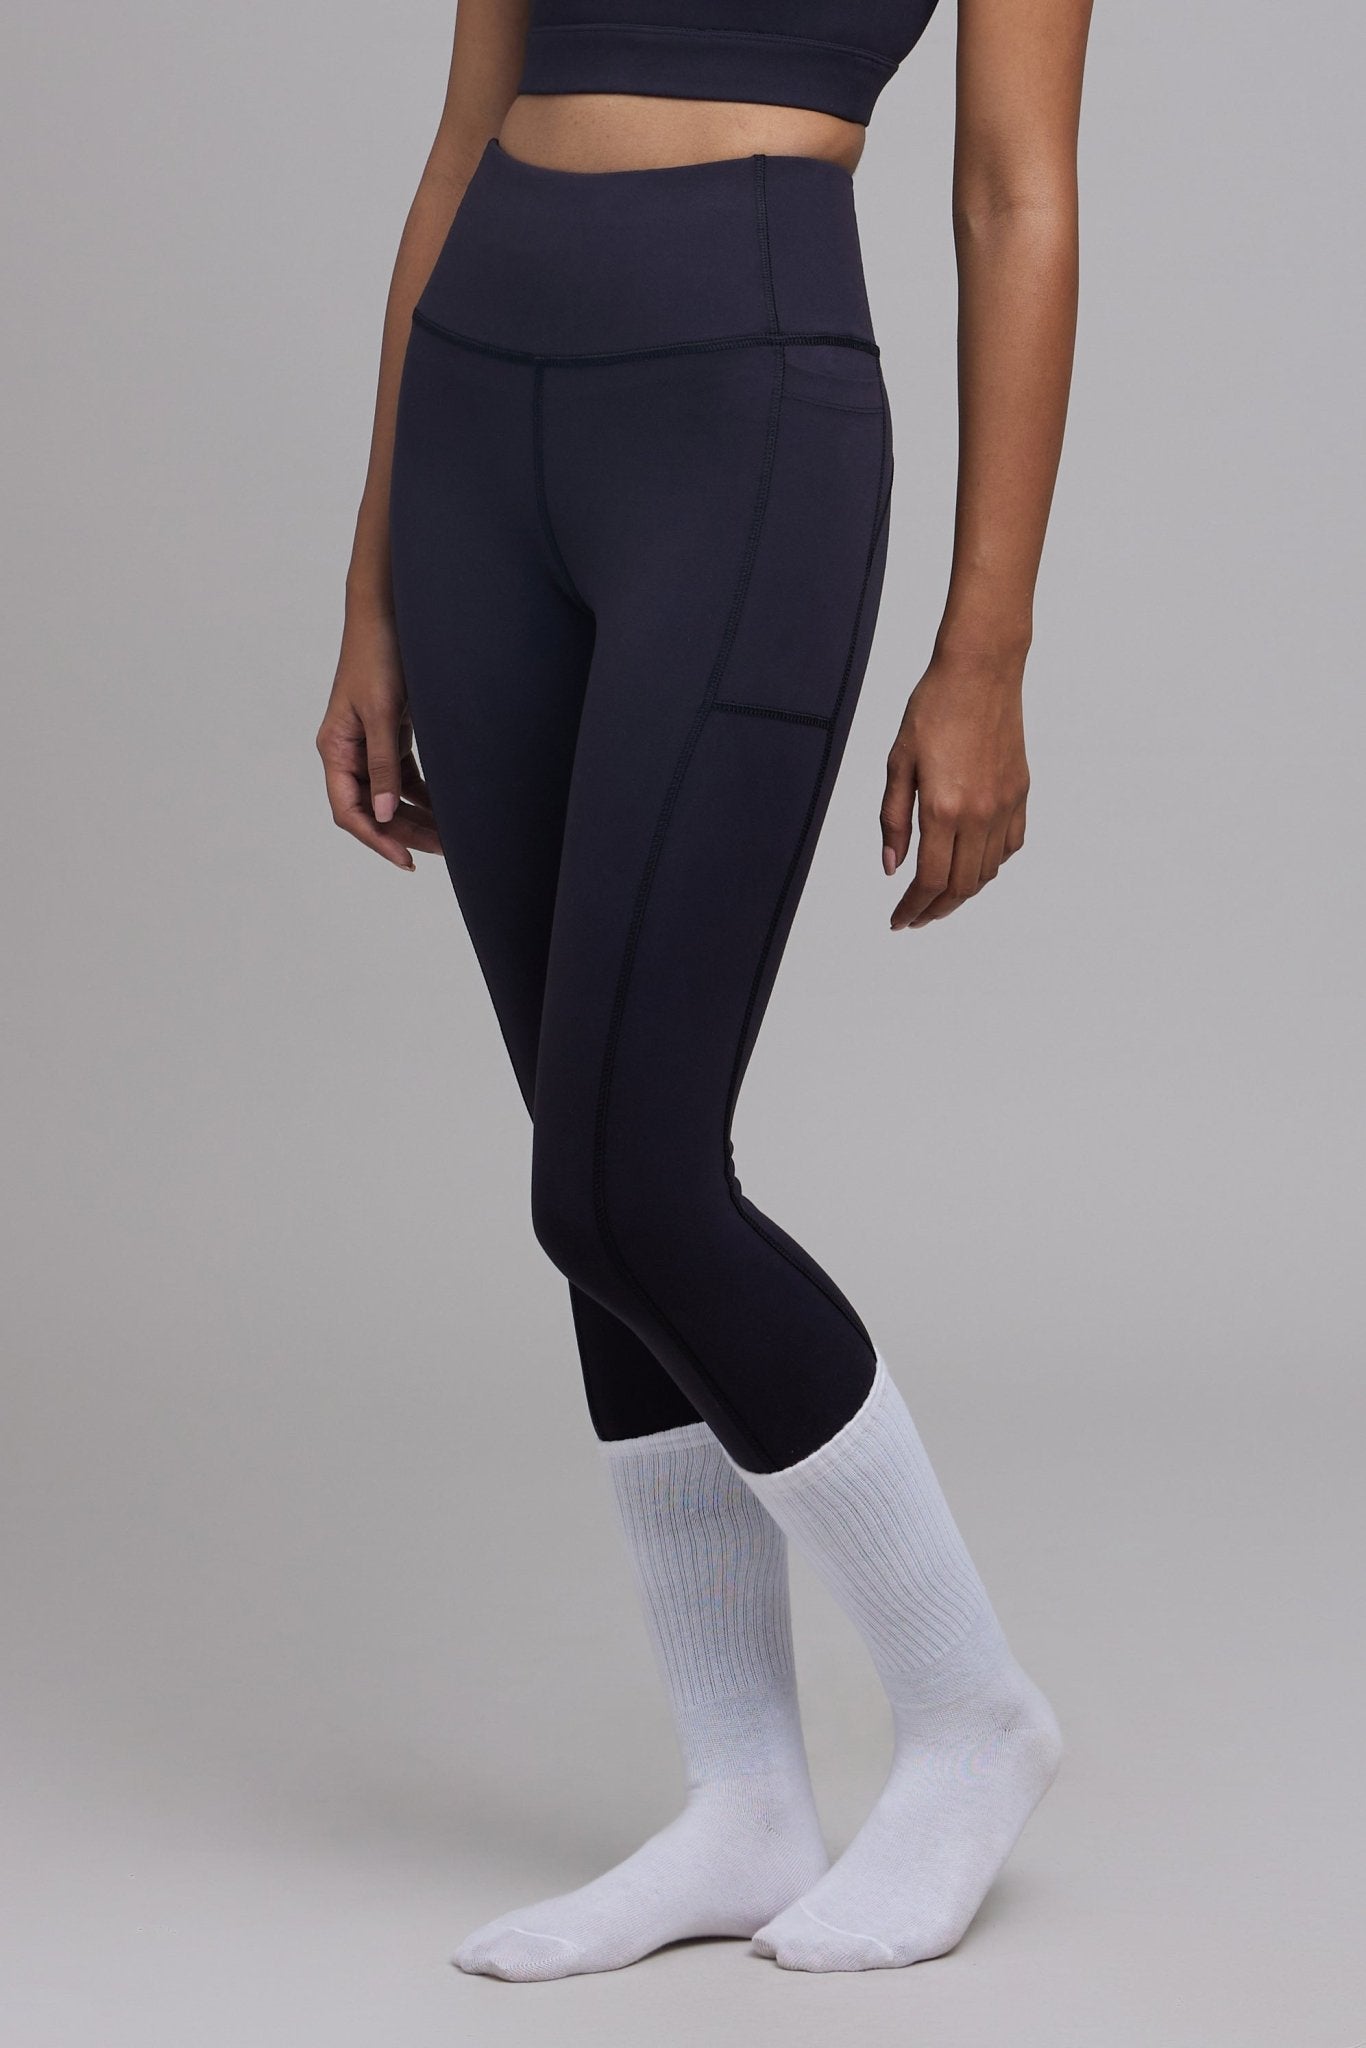 Buy Black Leggings With Skirt, Fitted Stretch Pants, Yoga Pants With  Attached Skirt, Athleisure, Burke Skirted Leggings, Marcella MP1868 Online  in India - Etsy